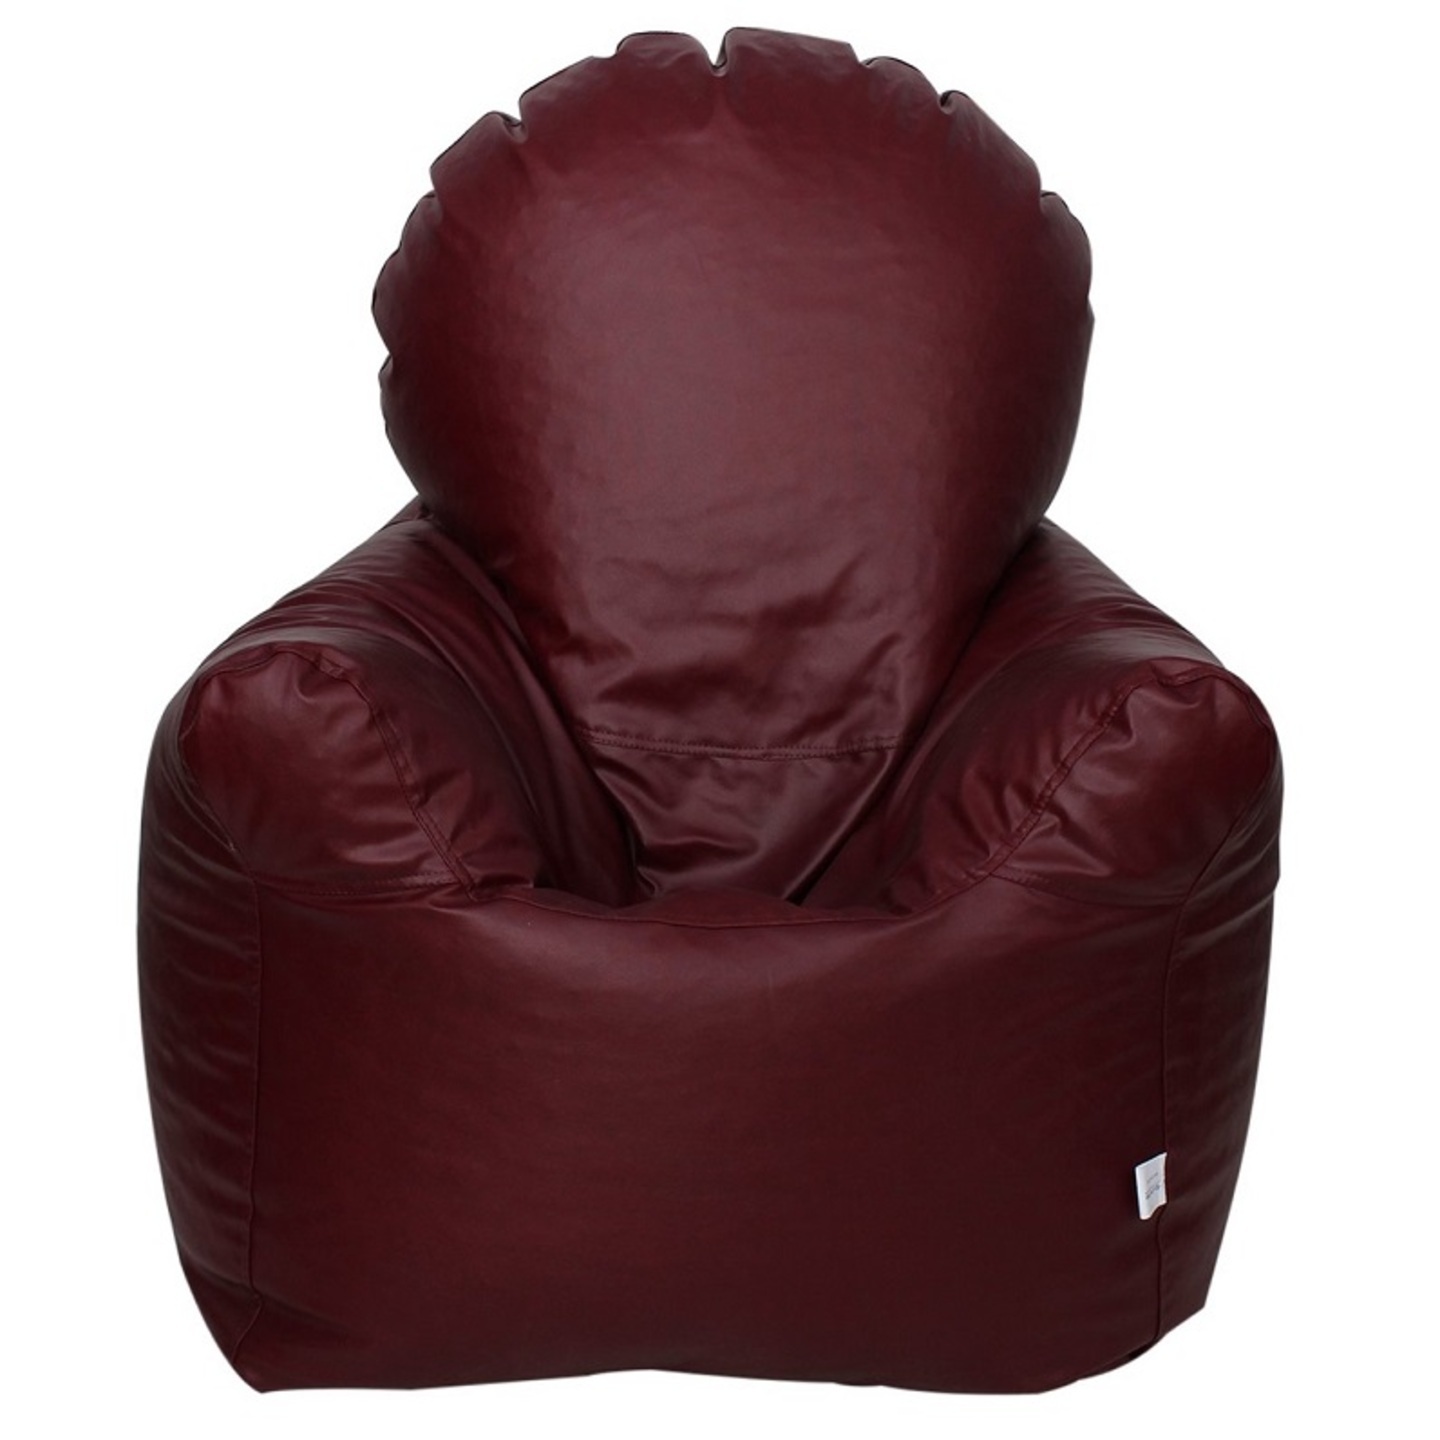 Leatherette Arm Chair Bean Bag Cover Size XXXL (Without Beans) - Maroon